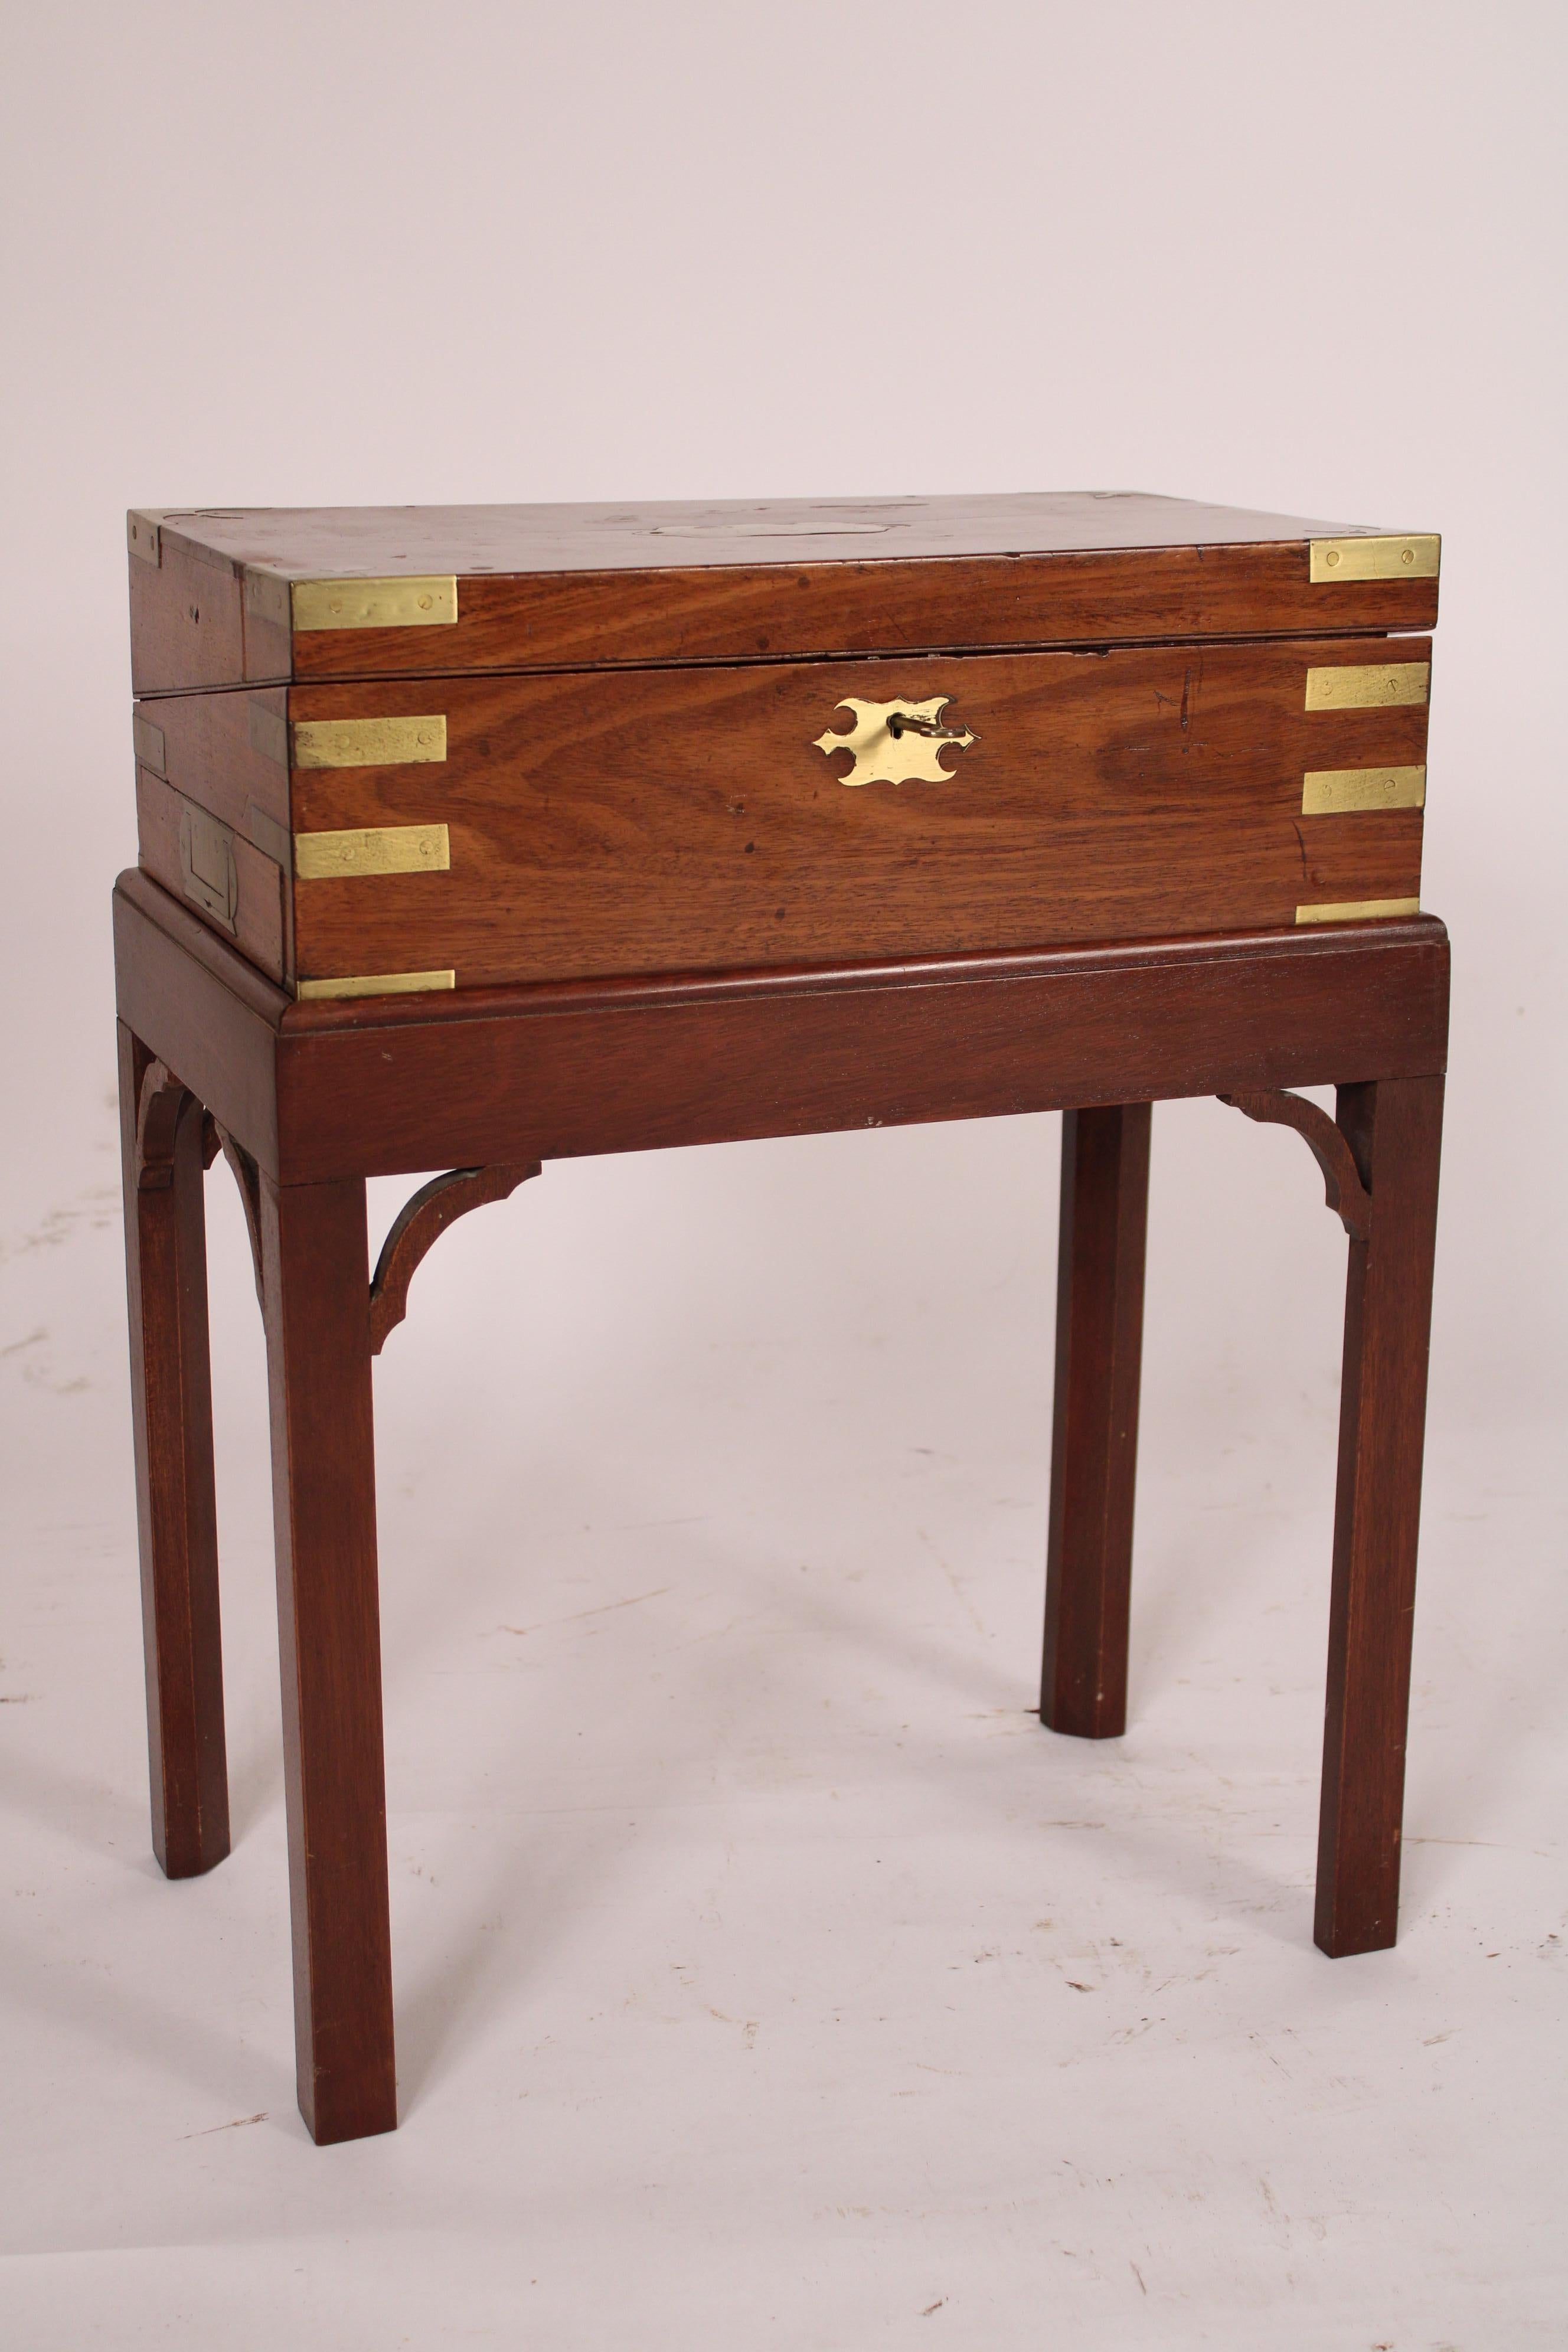 English Camphor Wood Campaign Style Writing Box on Stand